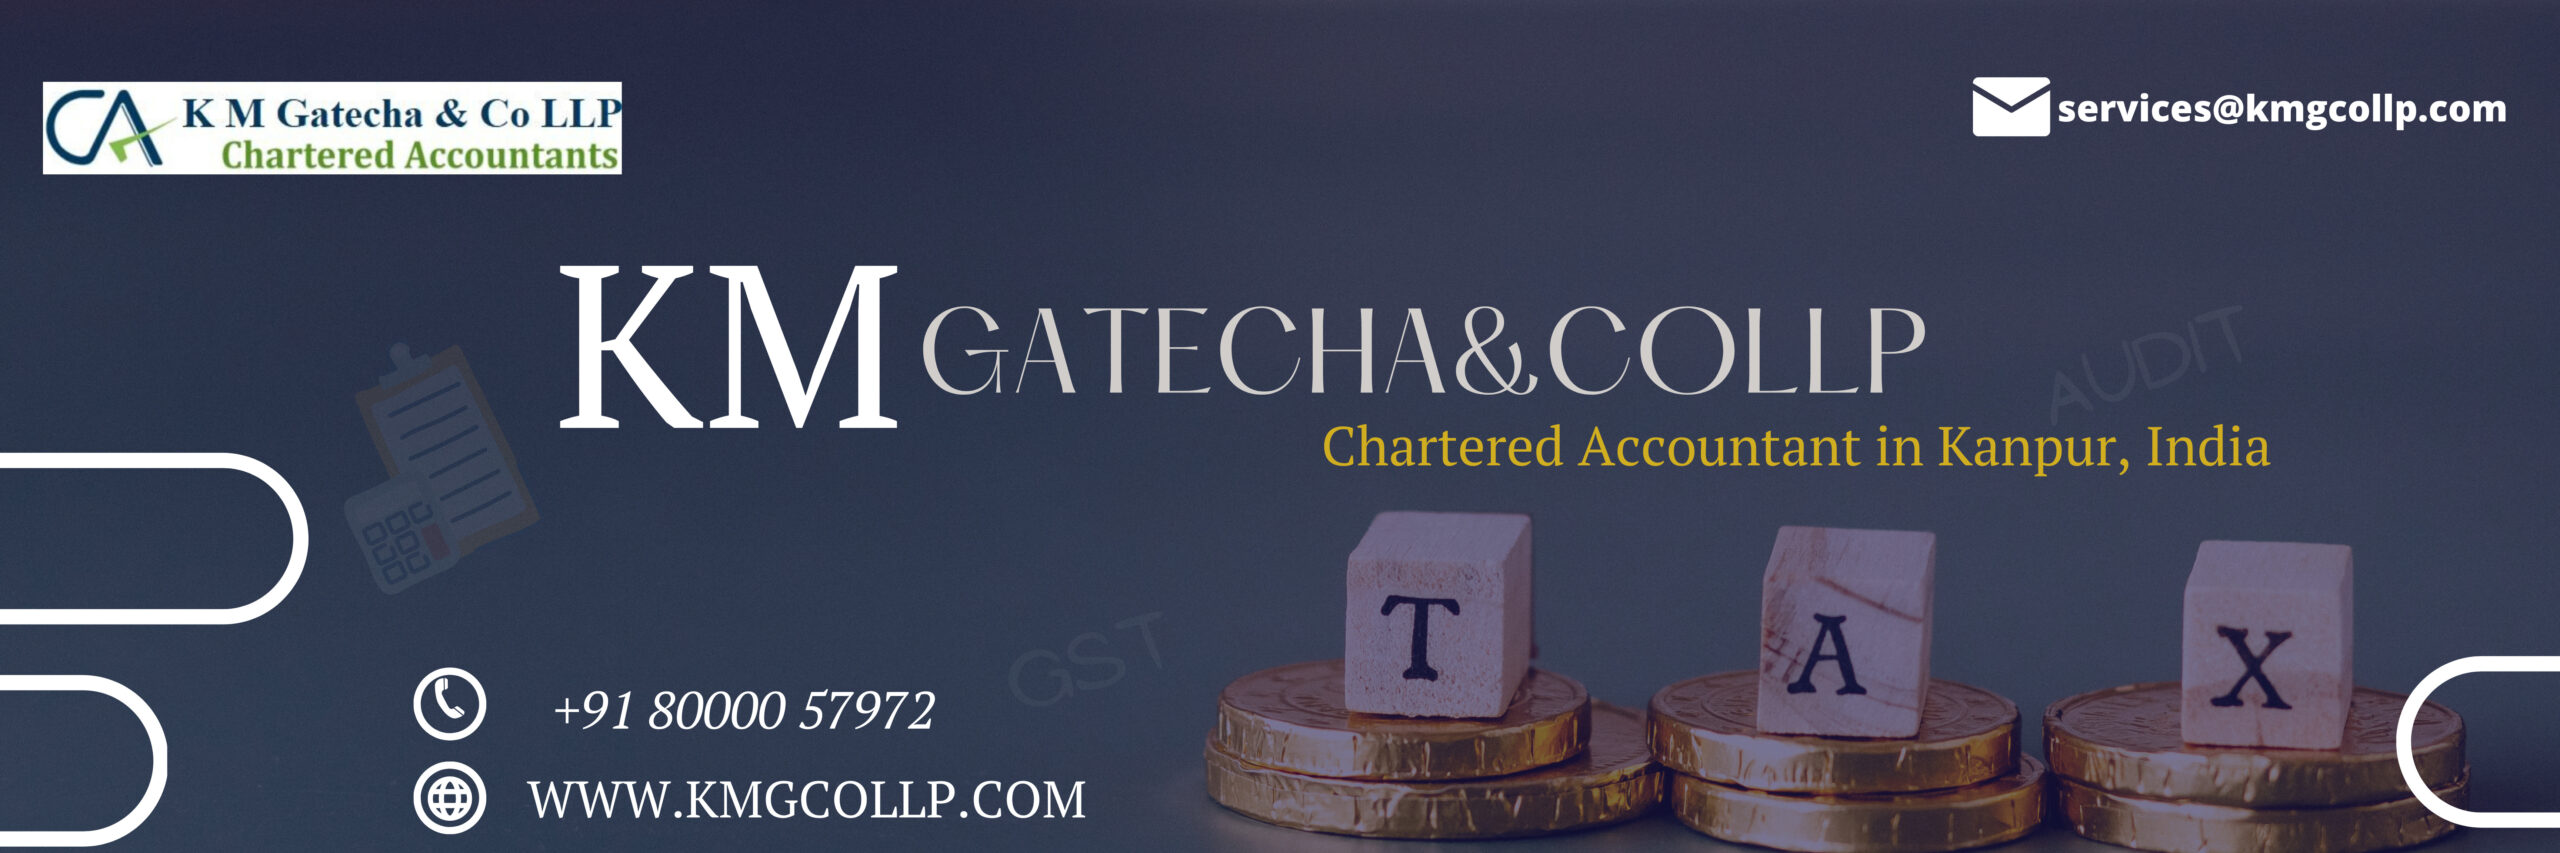 ca chartered accountant in Kanpur